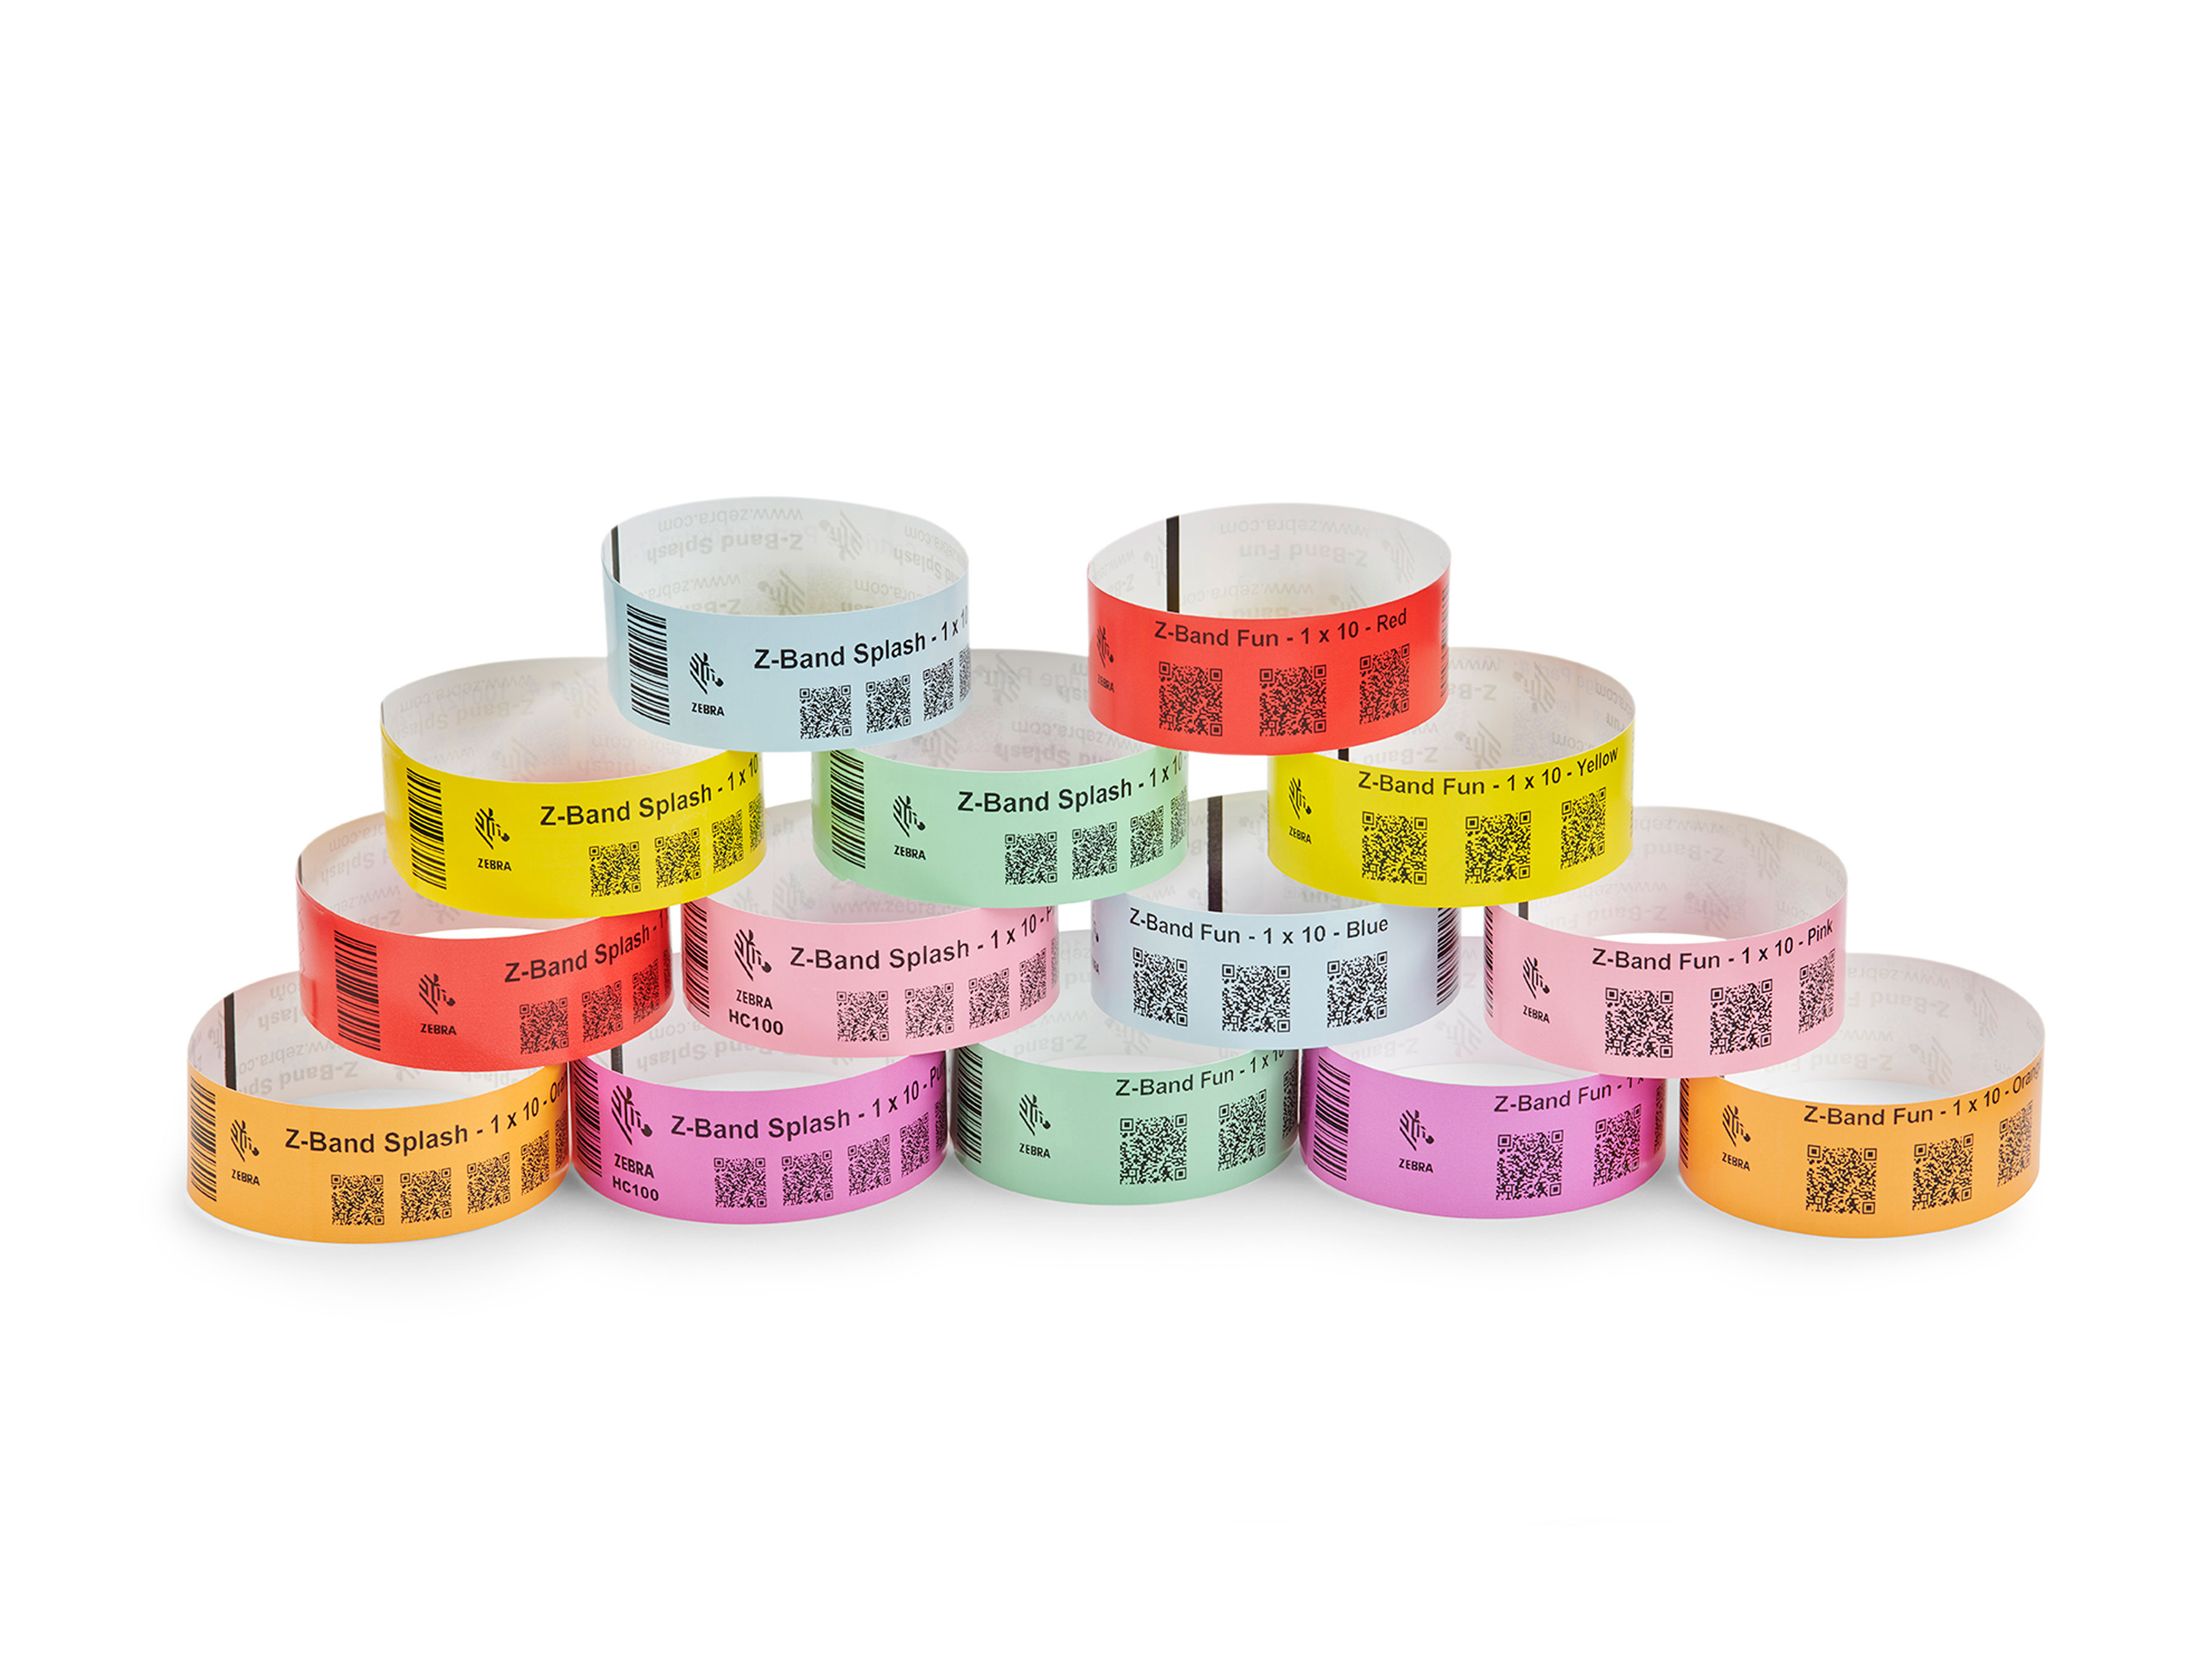 Front view of Zebra's Z-Band Splash and Z-Band Fun Wristband Solutions